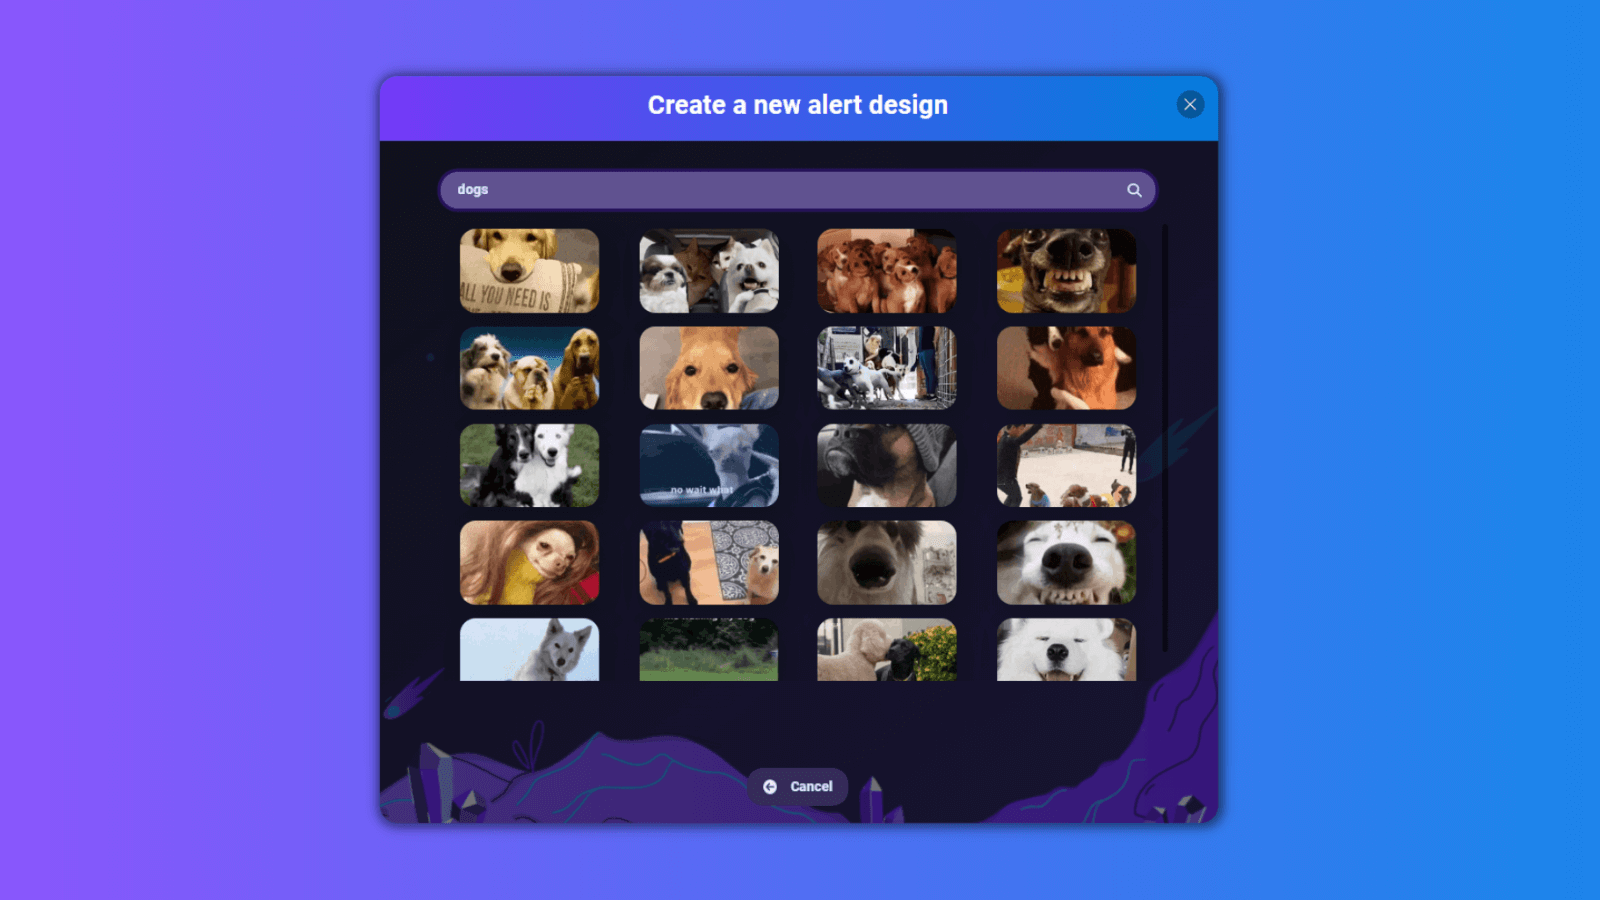 This image shows various dog GIFs availabe in the Sound Alerts GIF library.